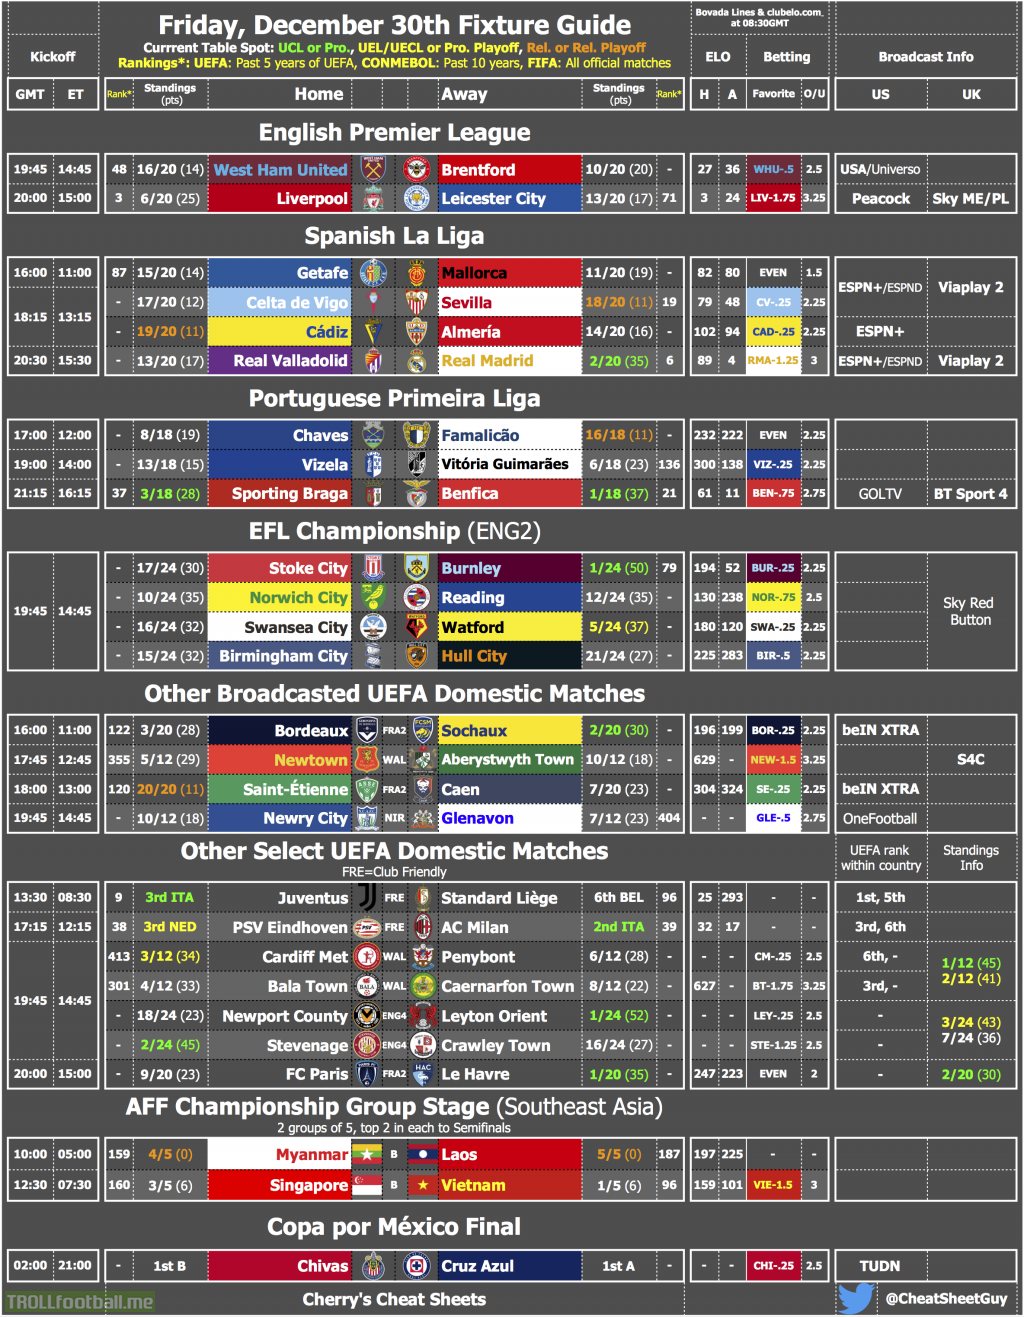 Cherry's TV & Fixture Cheat Sheet for Friday